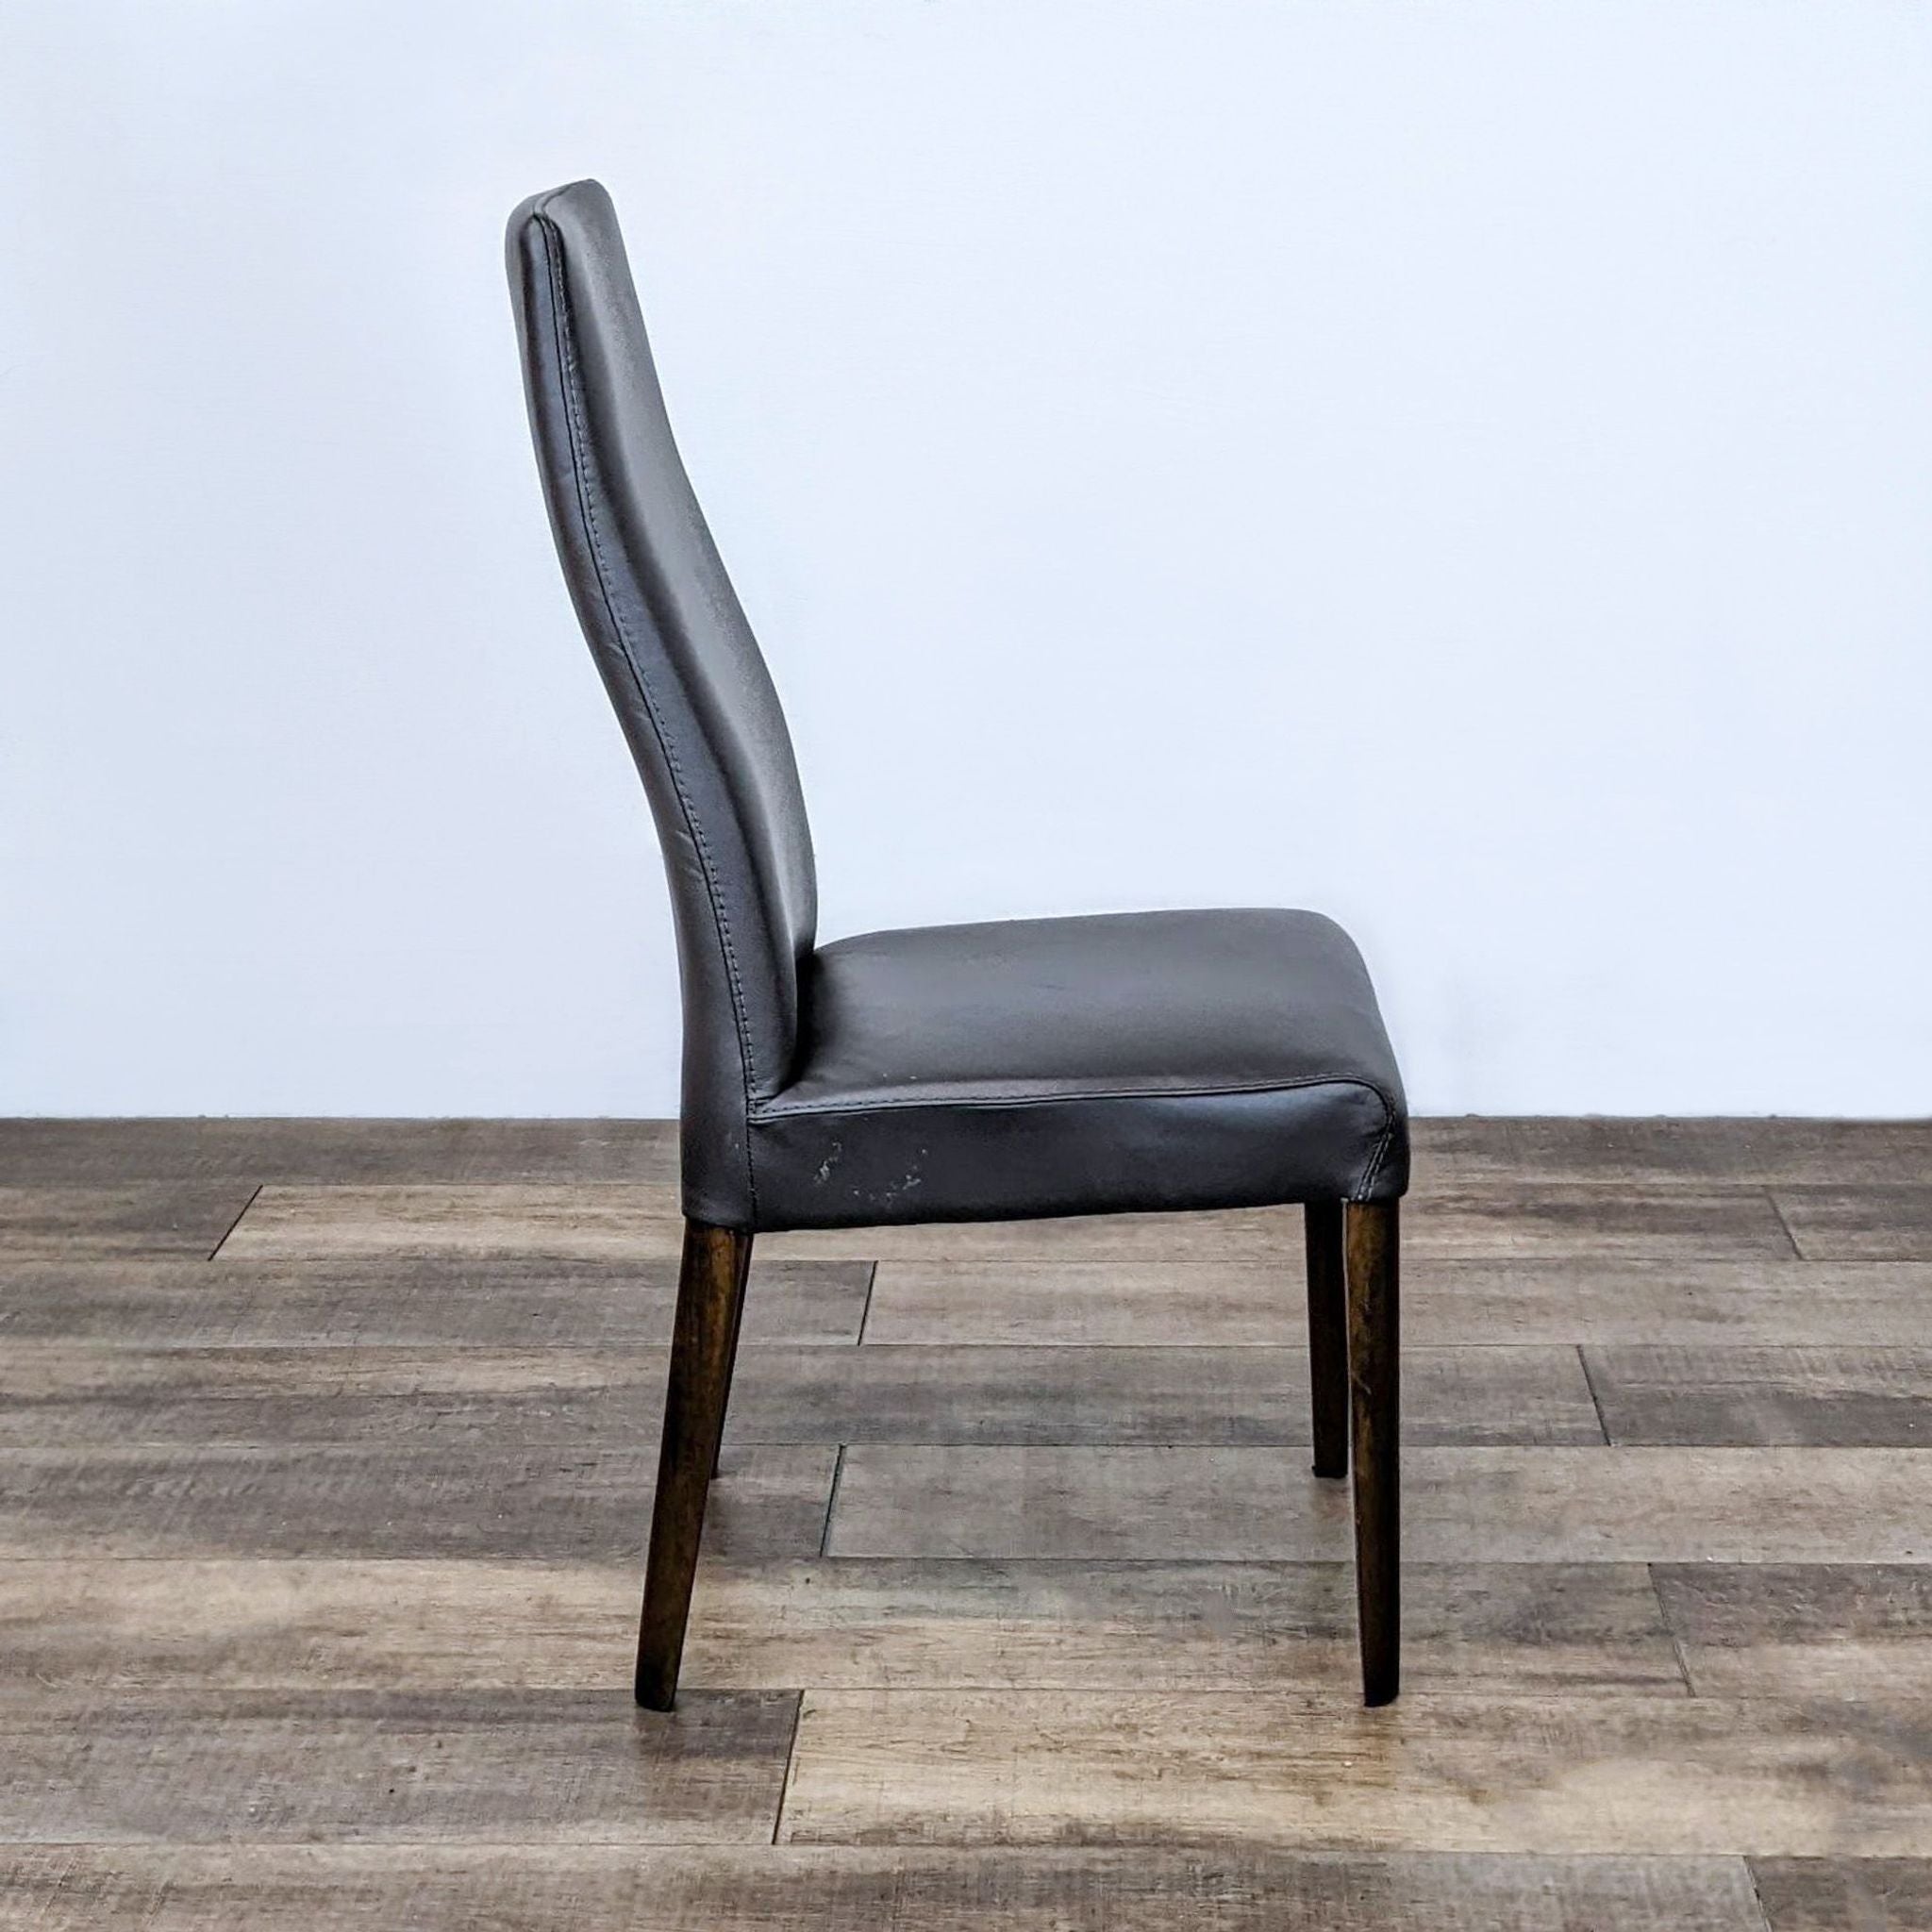 Side angle of a Reperch Scandinavian style leather upholstered dining chair with wooden legs.